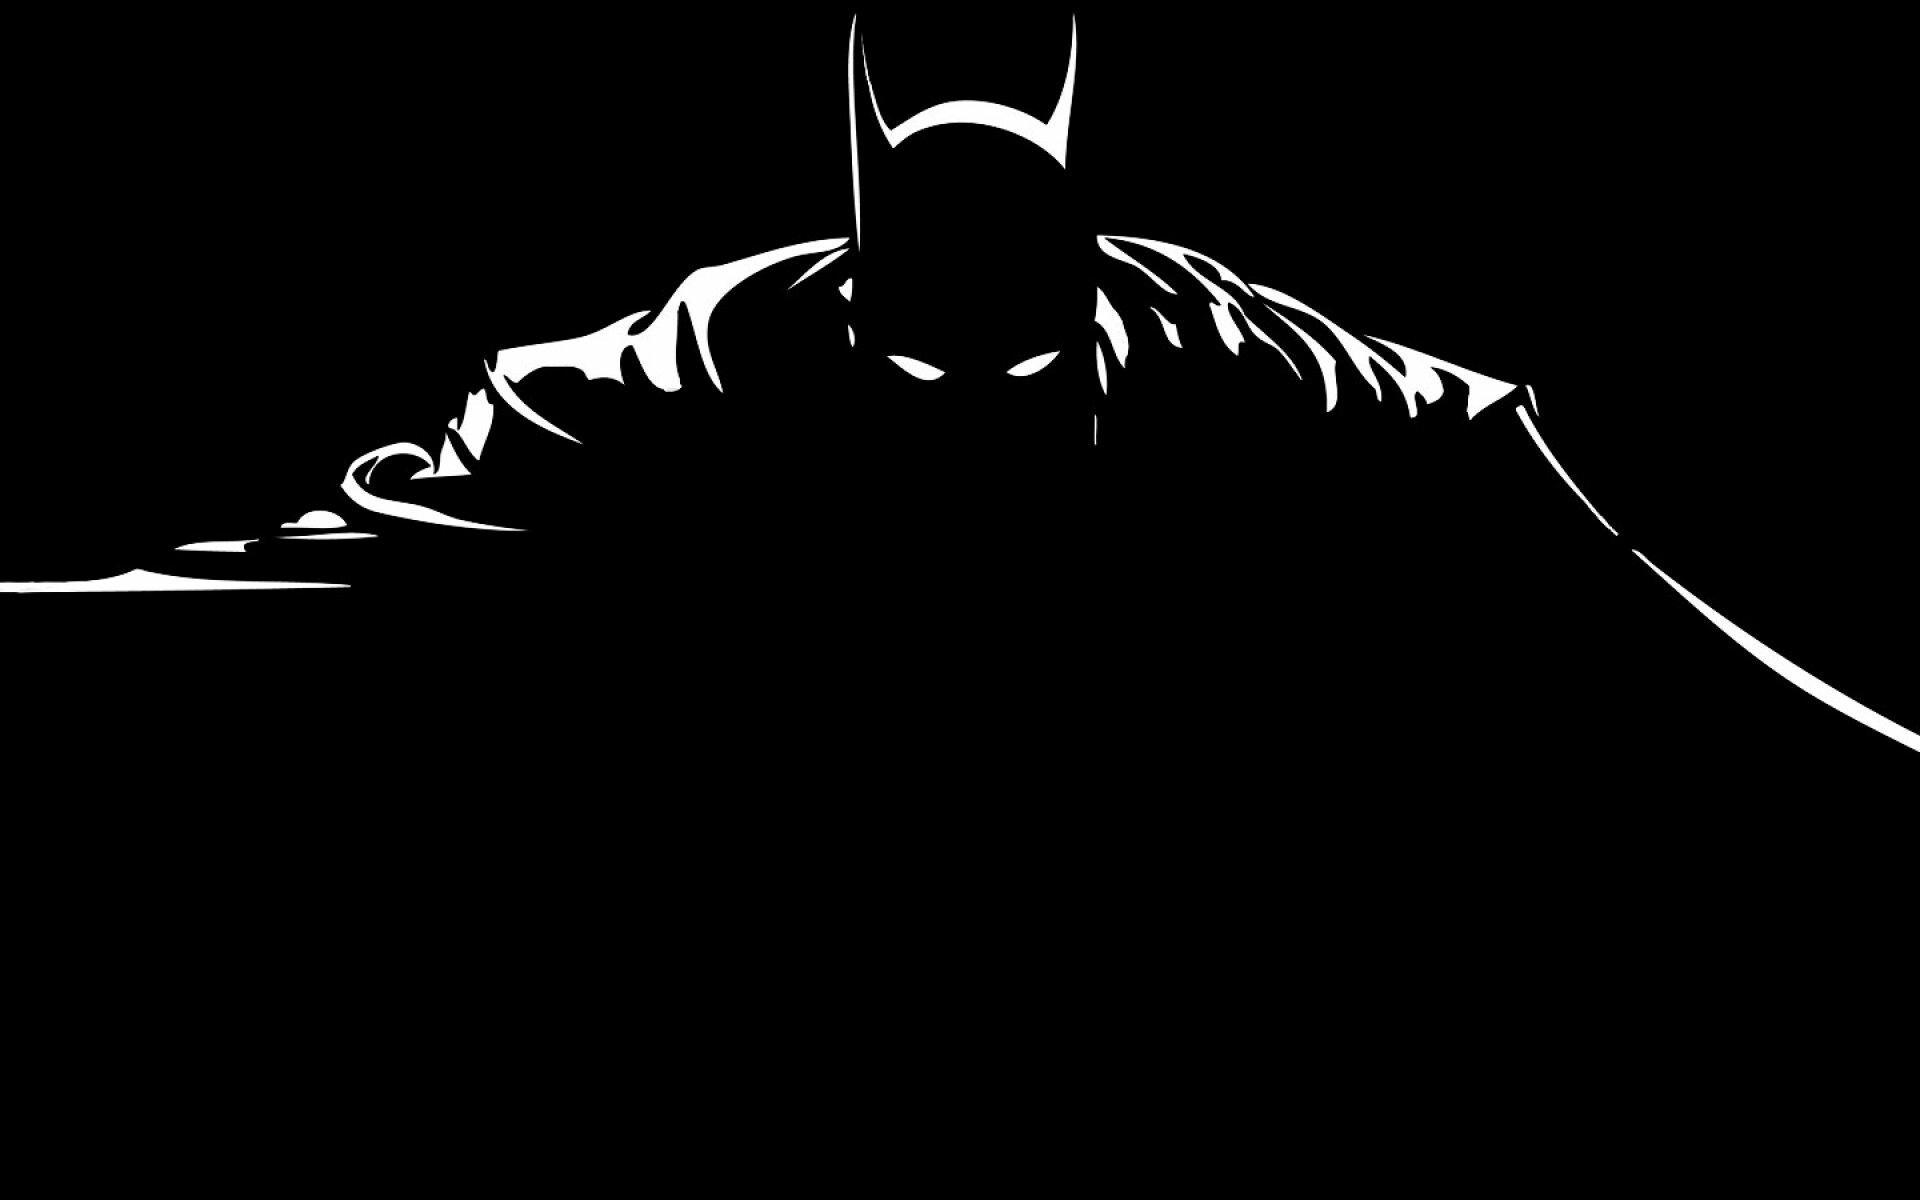 57+ Batman Wallpapers: HD, 4K, 5K for PC and Mobile